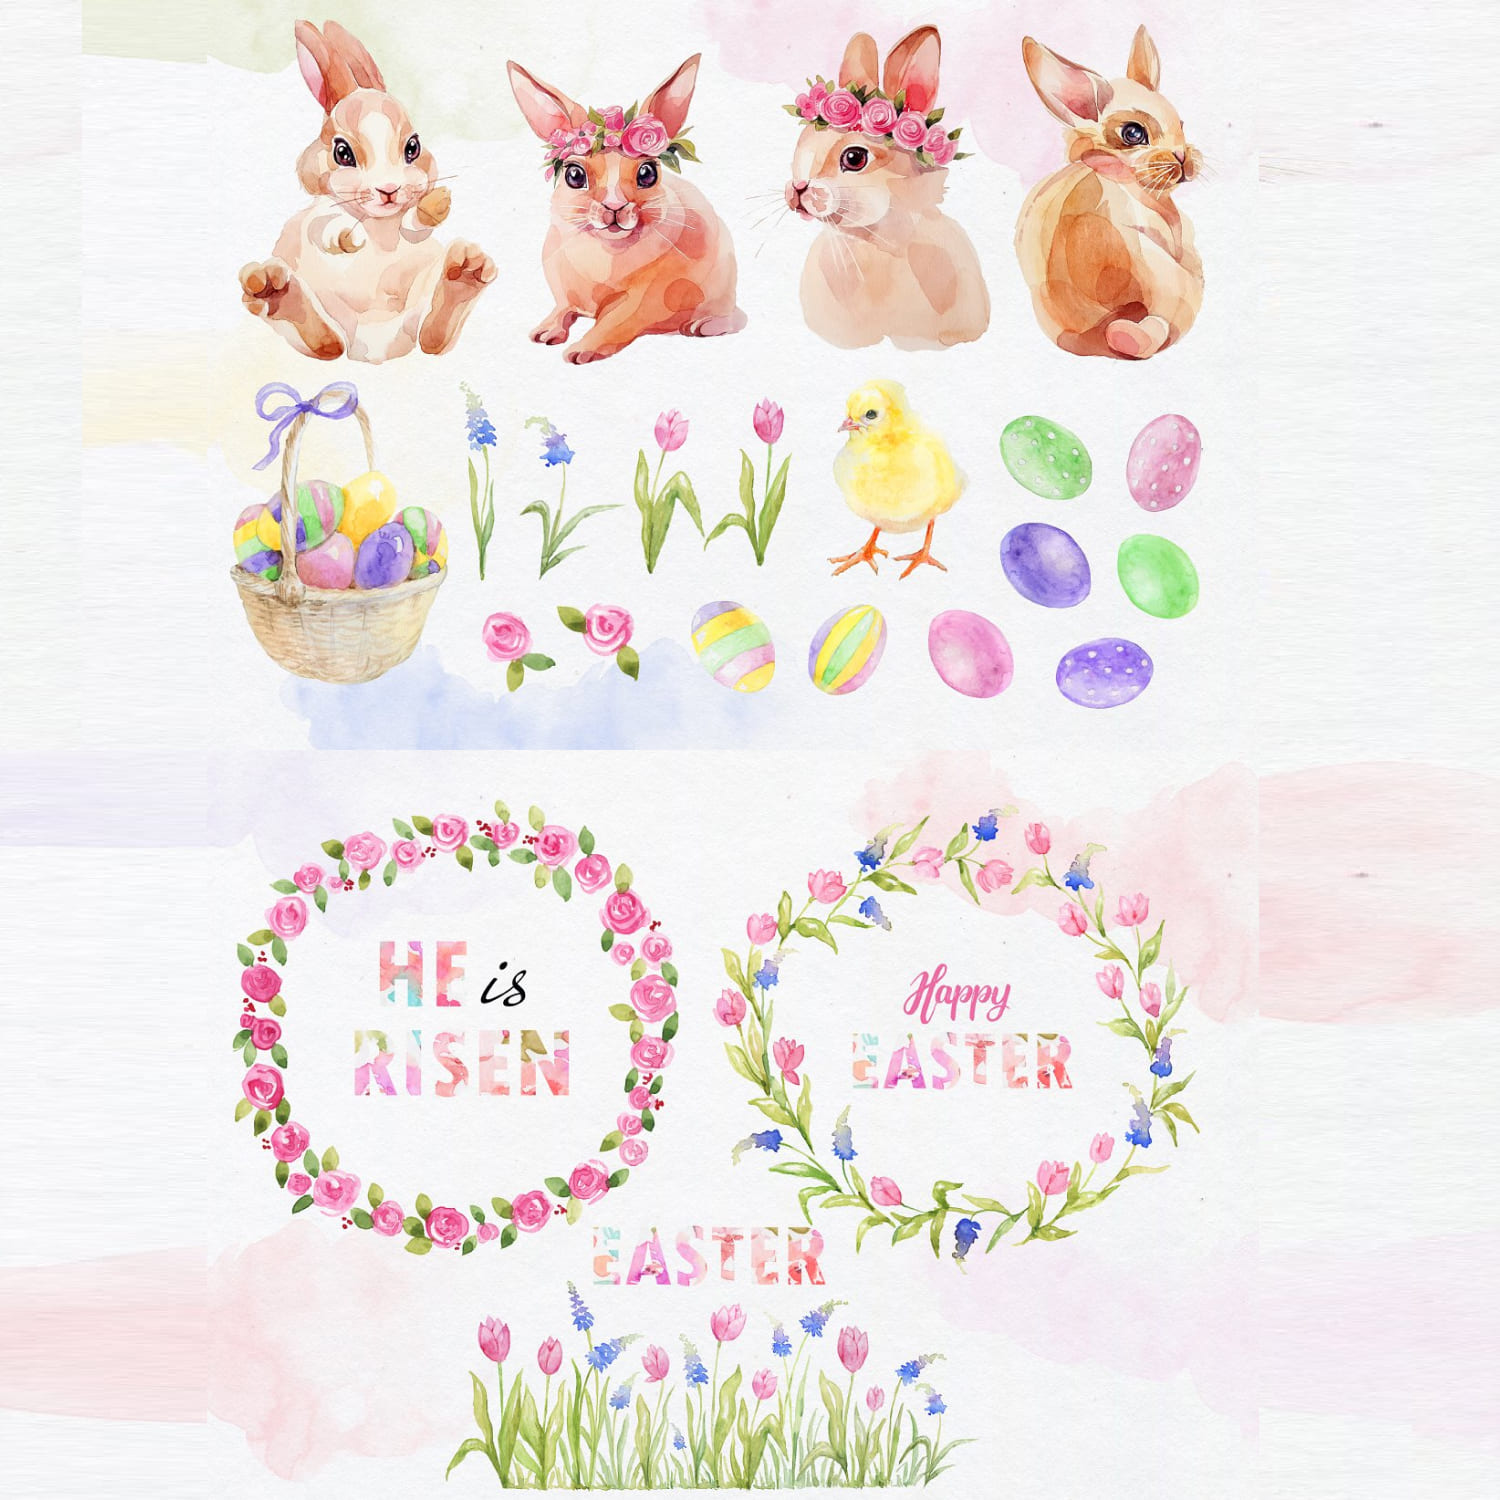 Flowers, eggs, Easter bunnies on a white background.